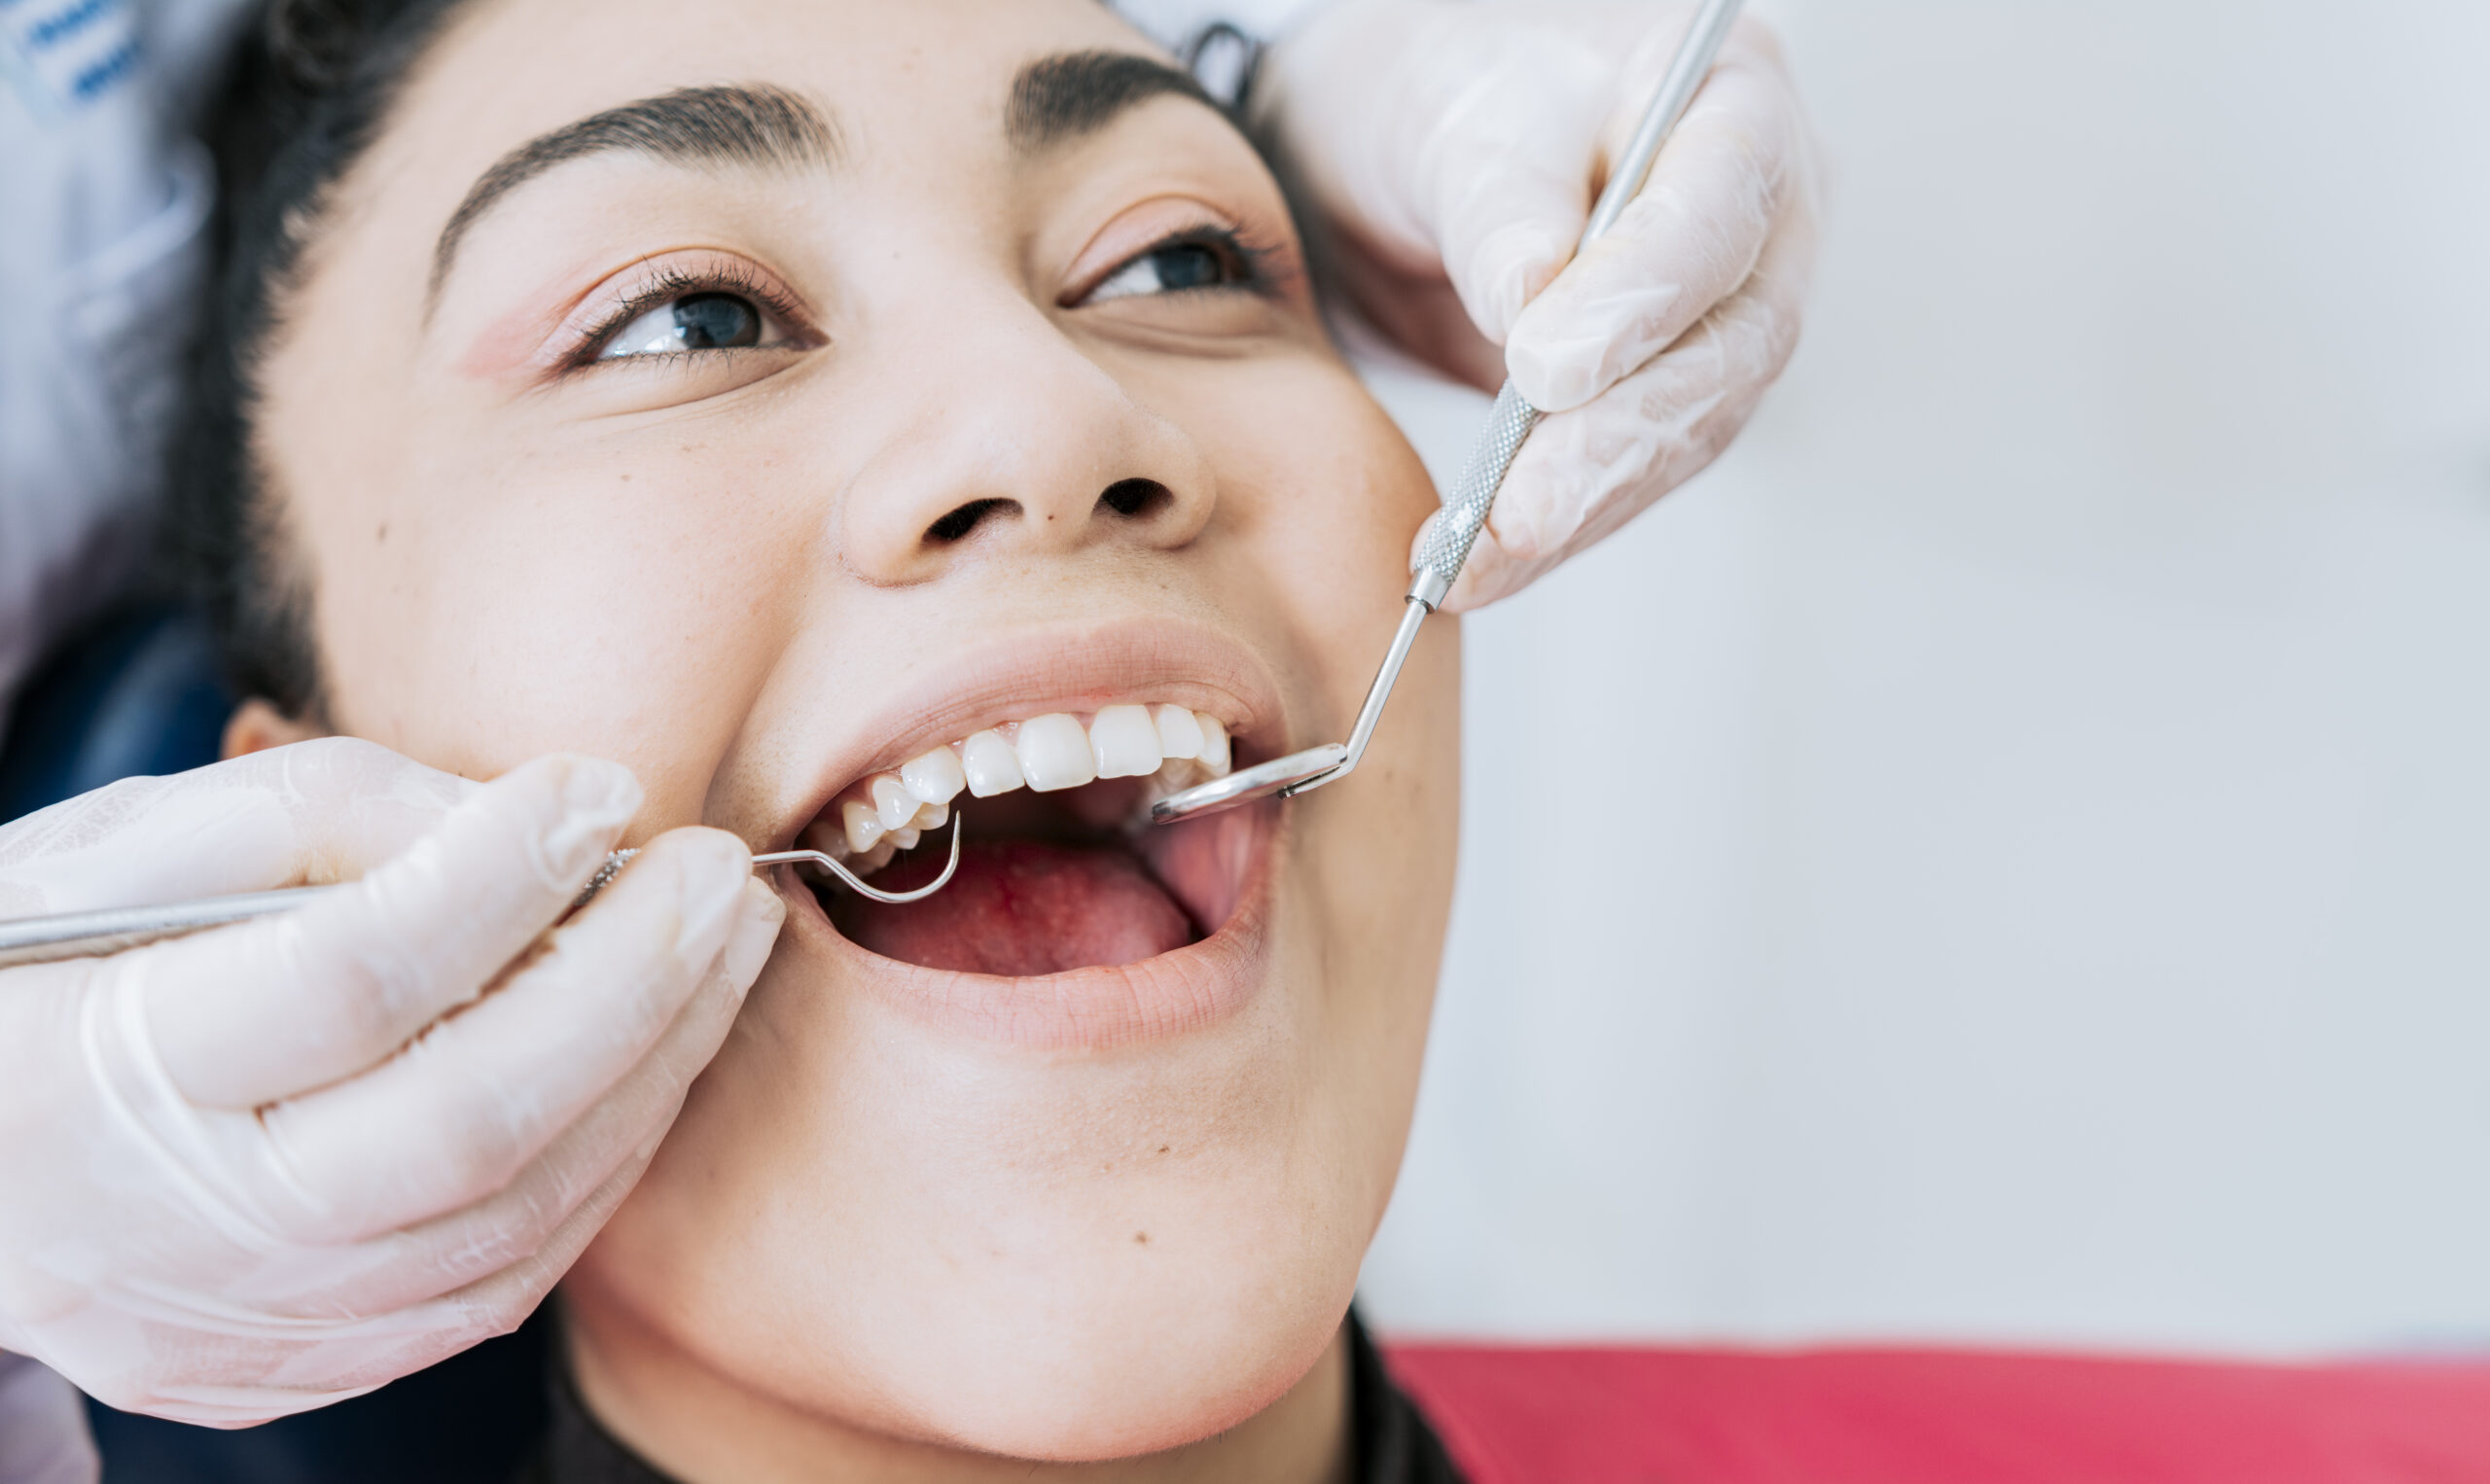 Young woman with mouth open wide, gloved hands holding instruments for teeth cleaning